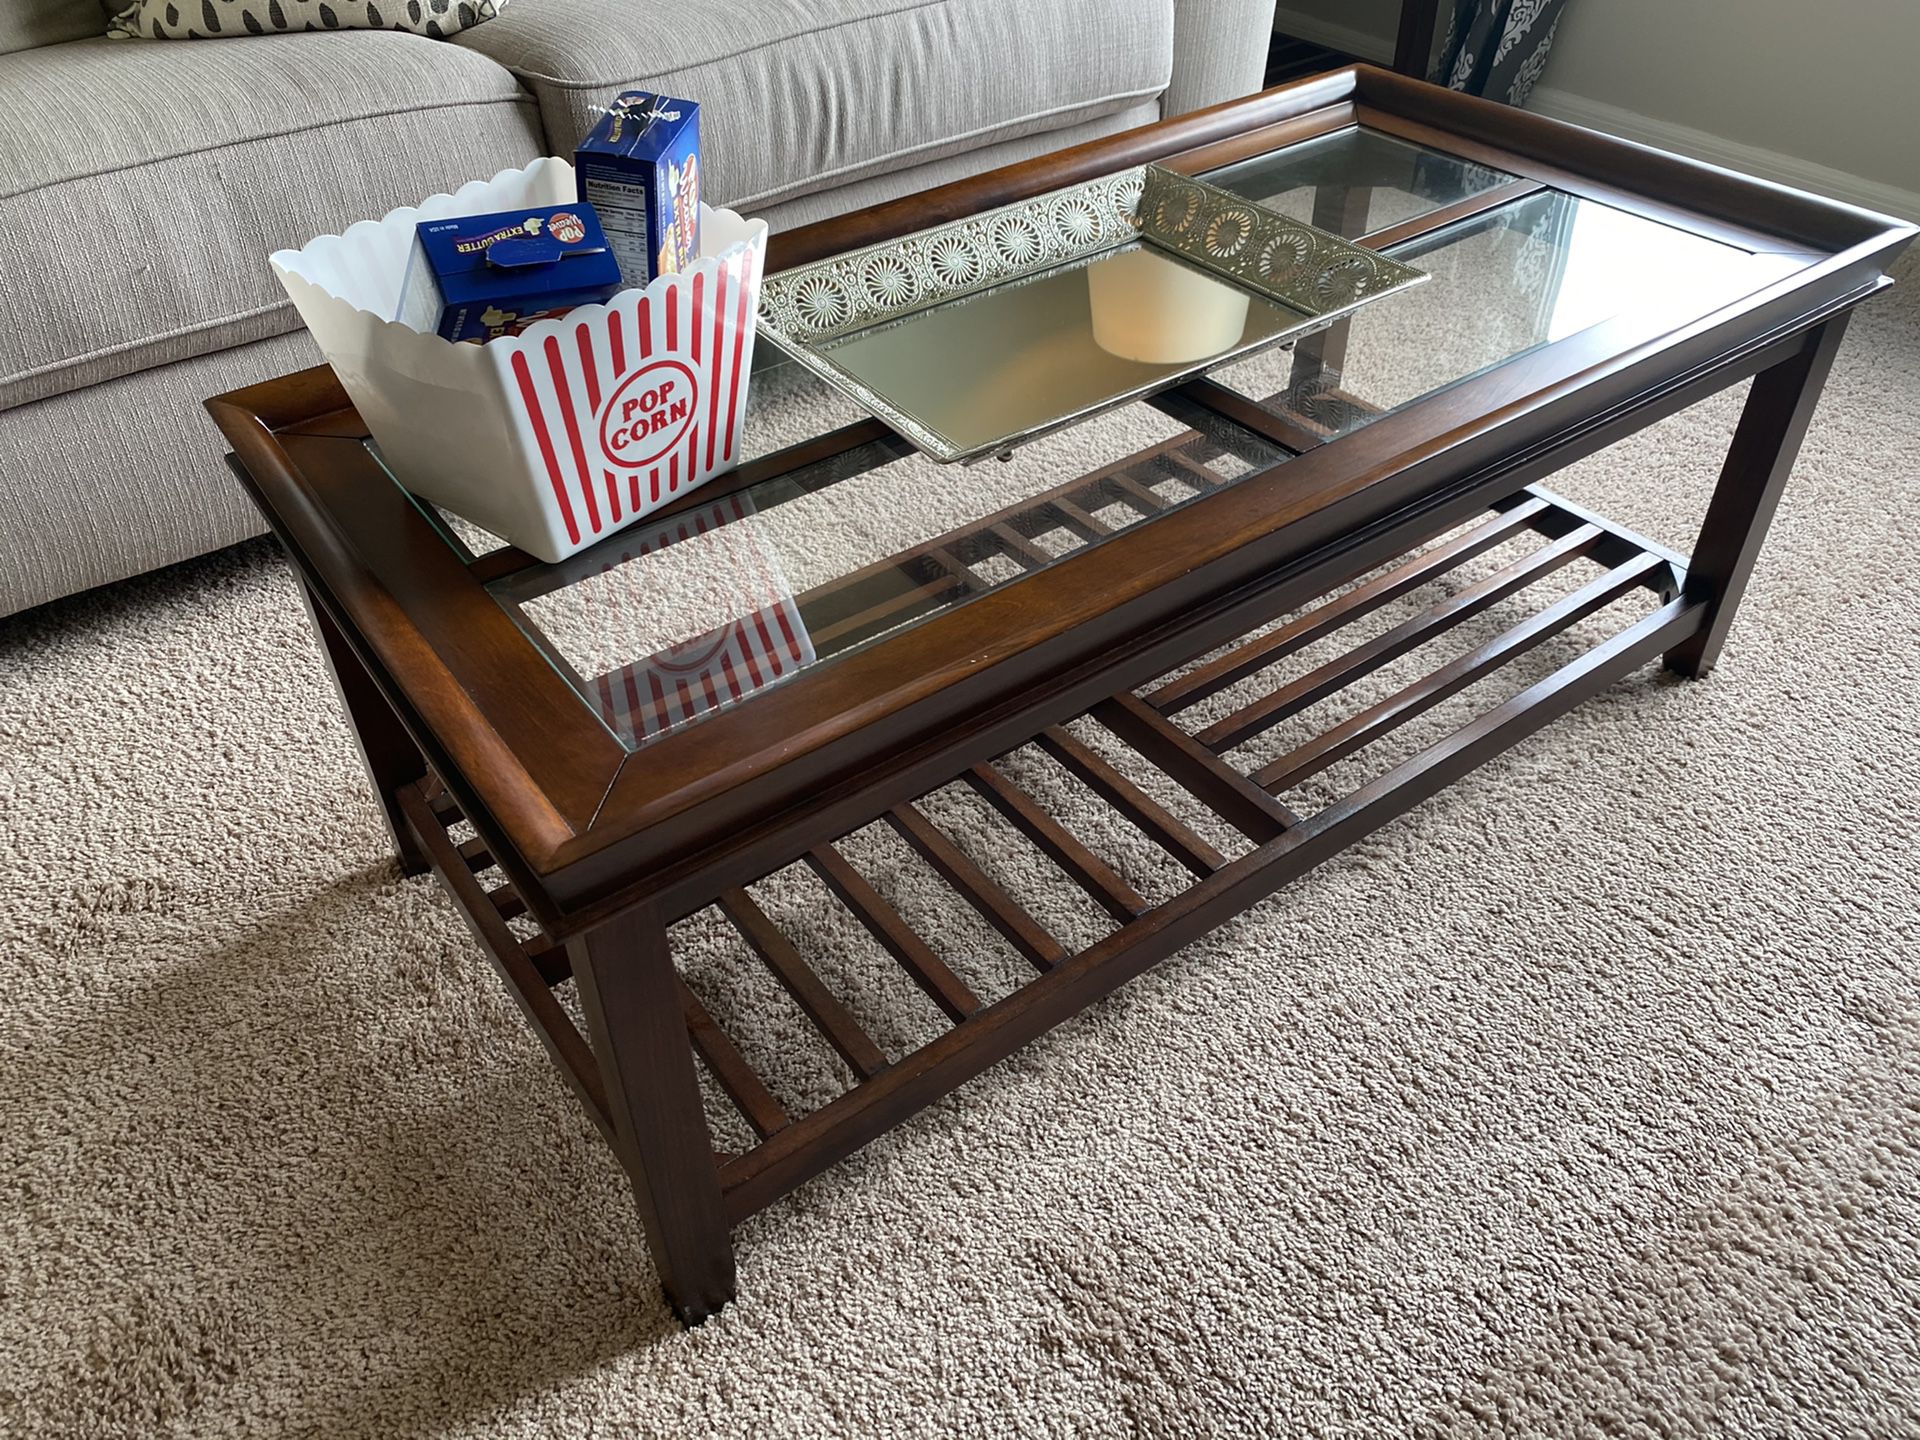 Coffee Table Set - Used Only For Staging Purposes To Sell a House